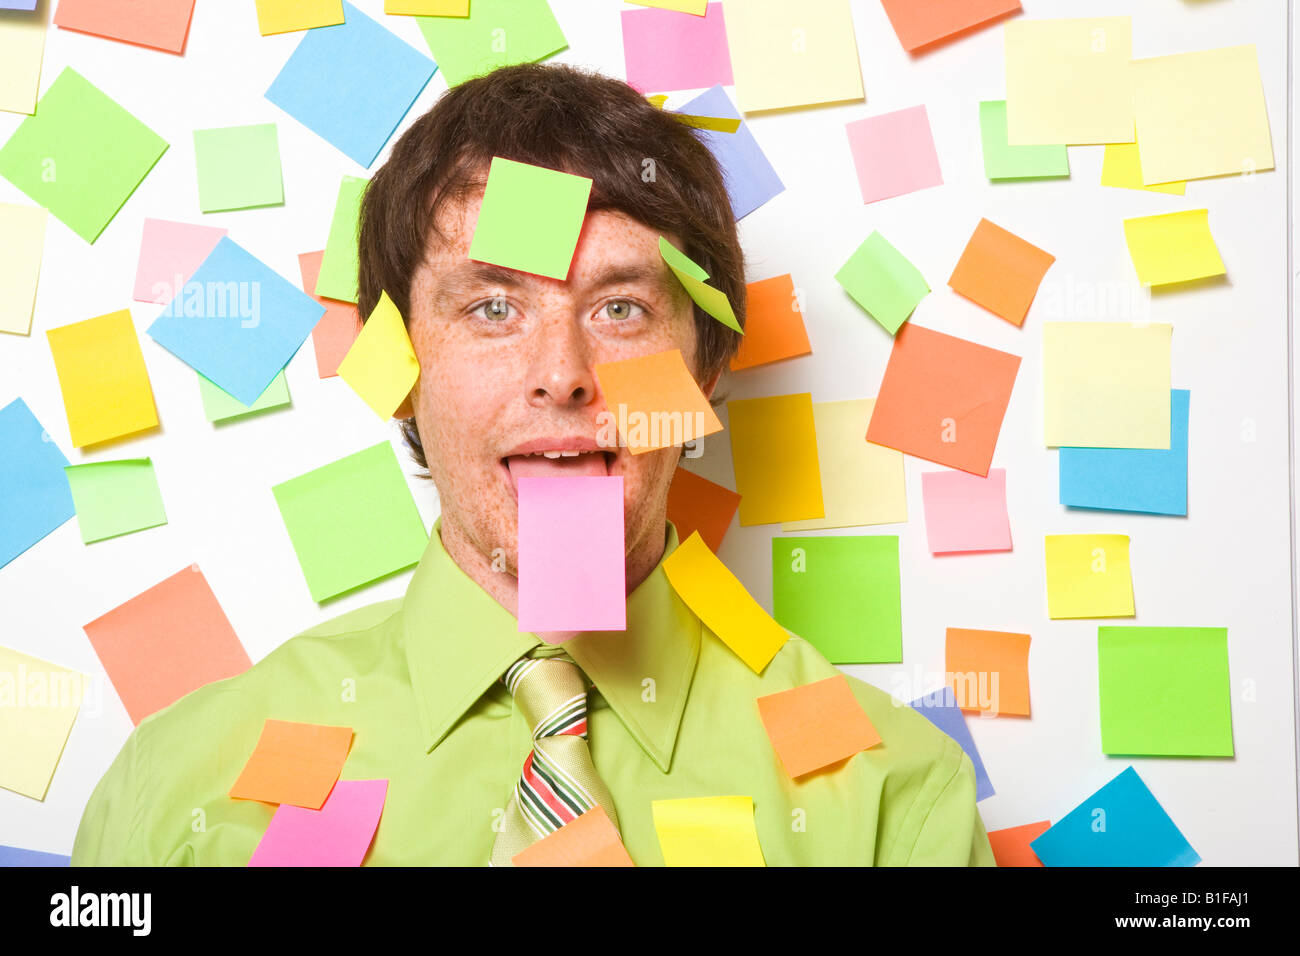 Businessman with adhesive note on forehead Stock Photo